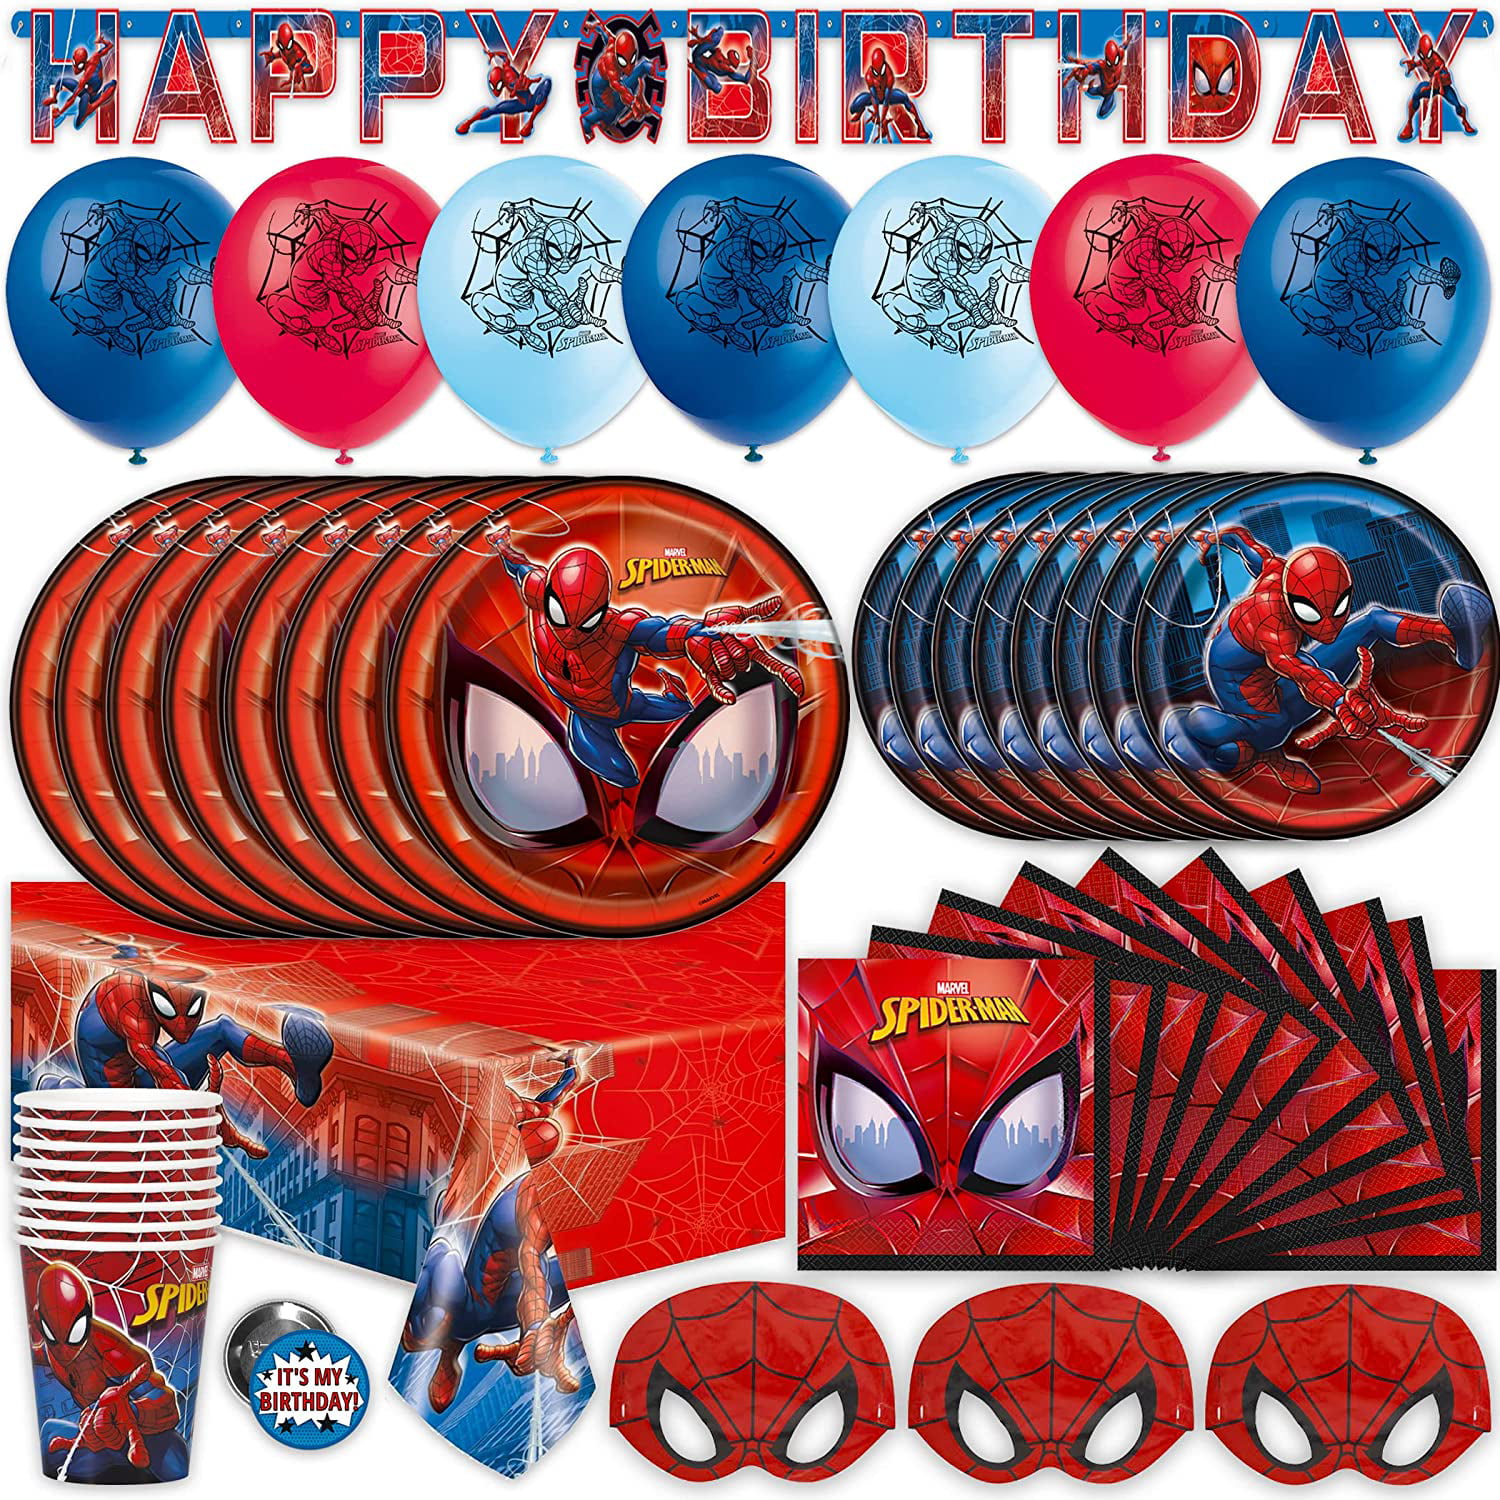 BANNER CENTERPIECES LOOT BAGS STRAWS MARVEL SPIDER-MAN BIRTHDAY PARTY SUPPLIES 